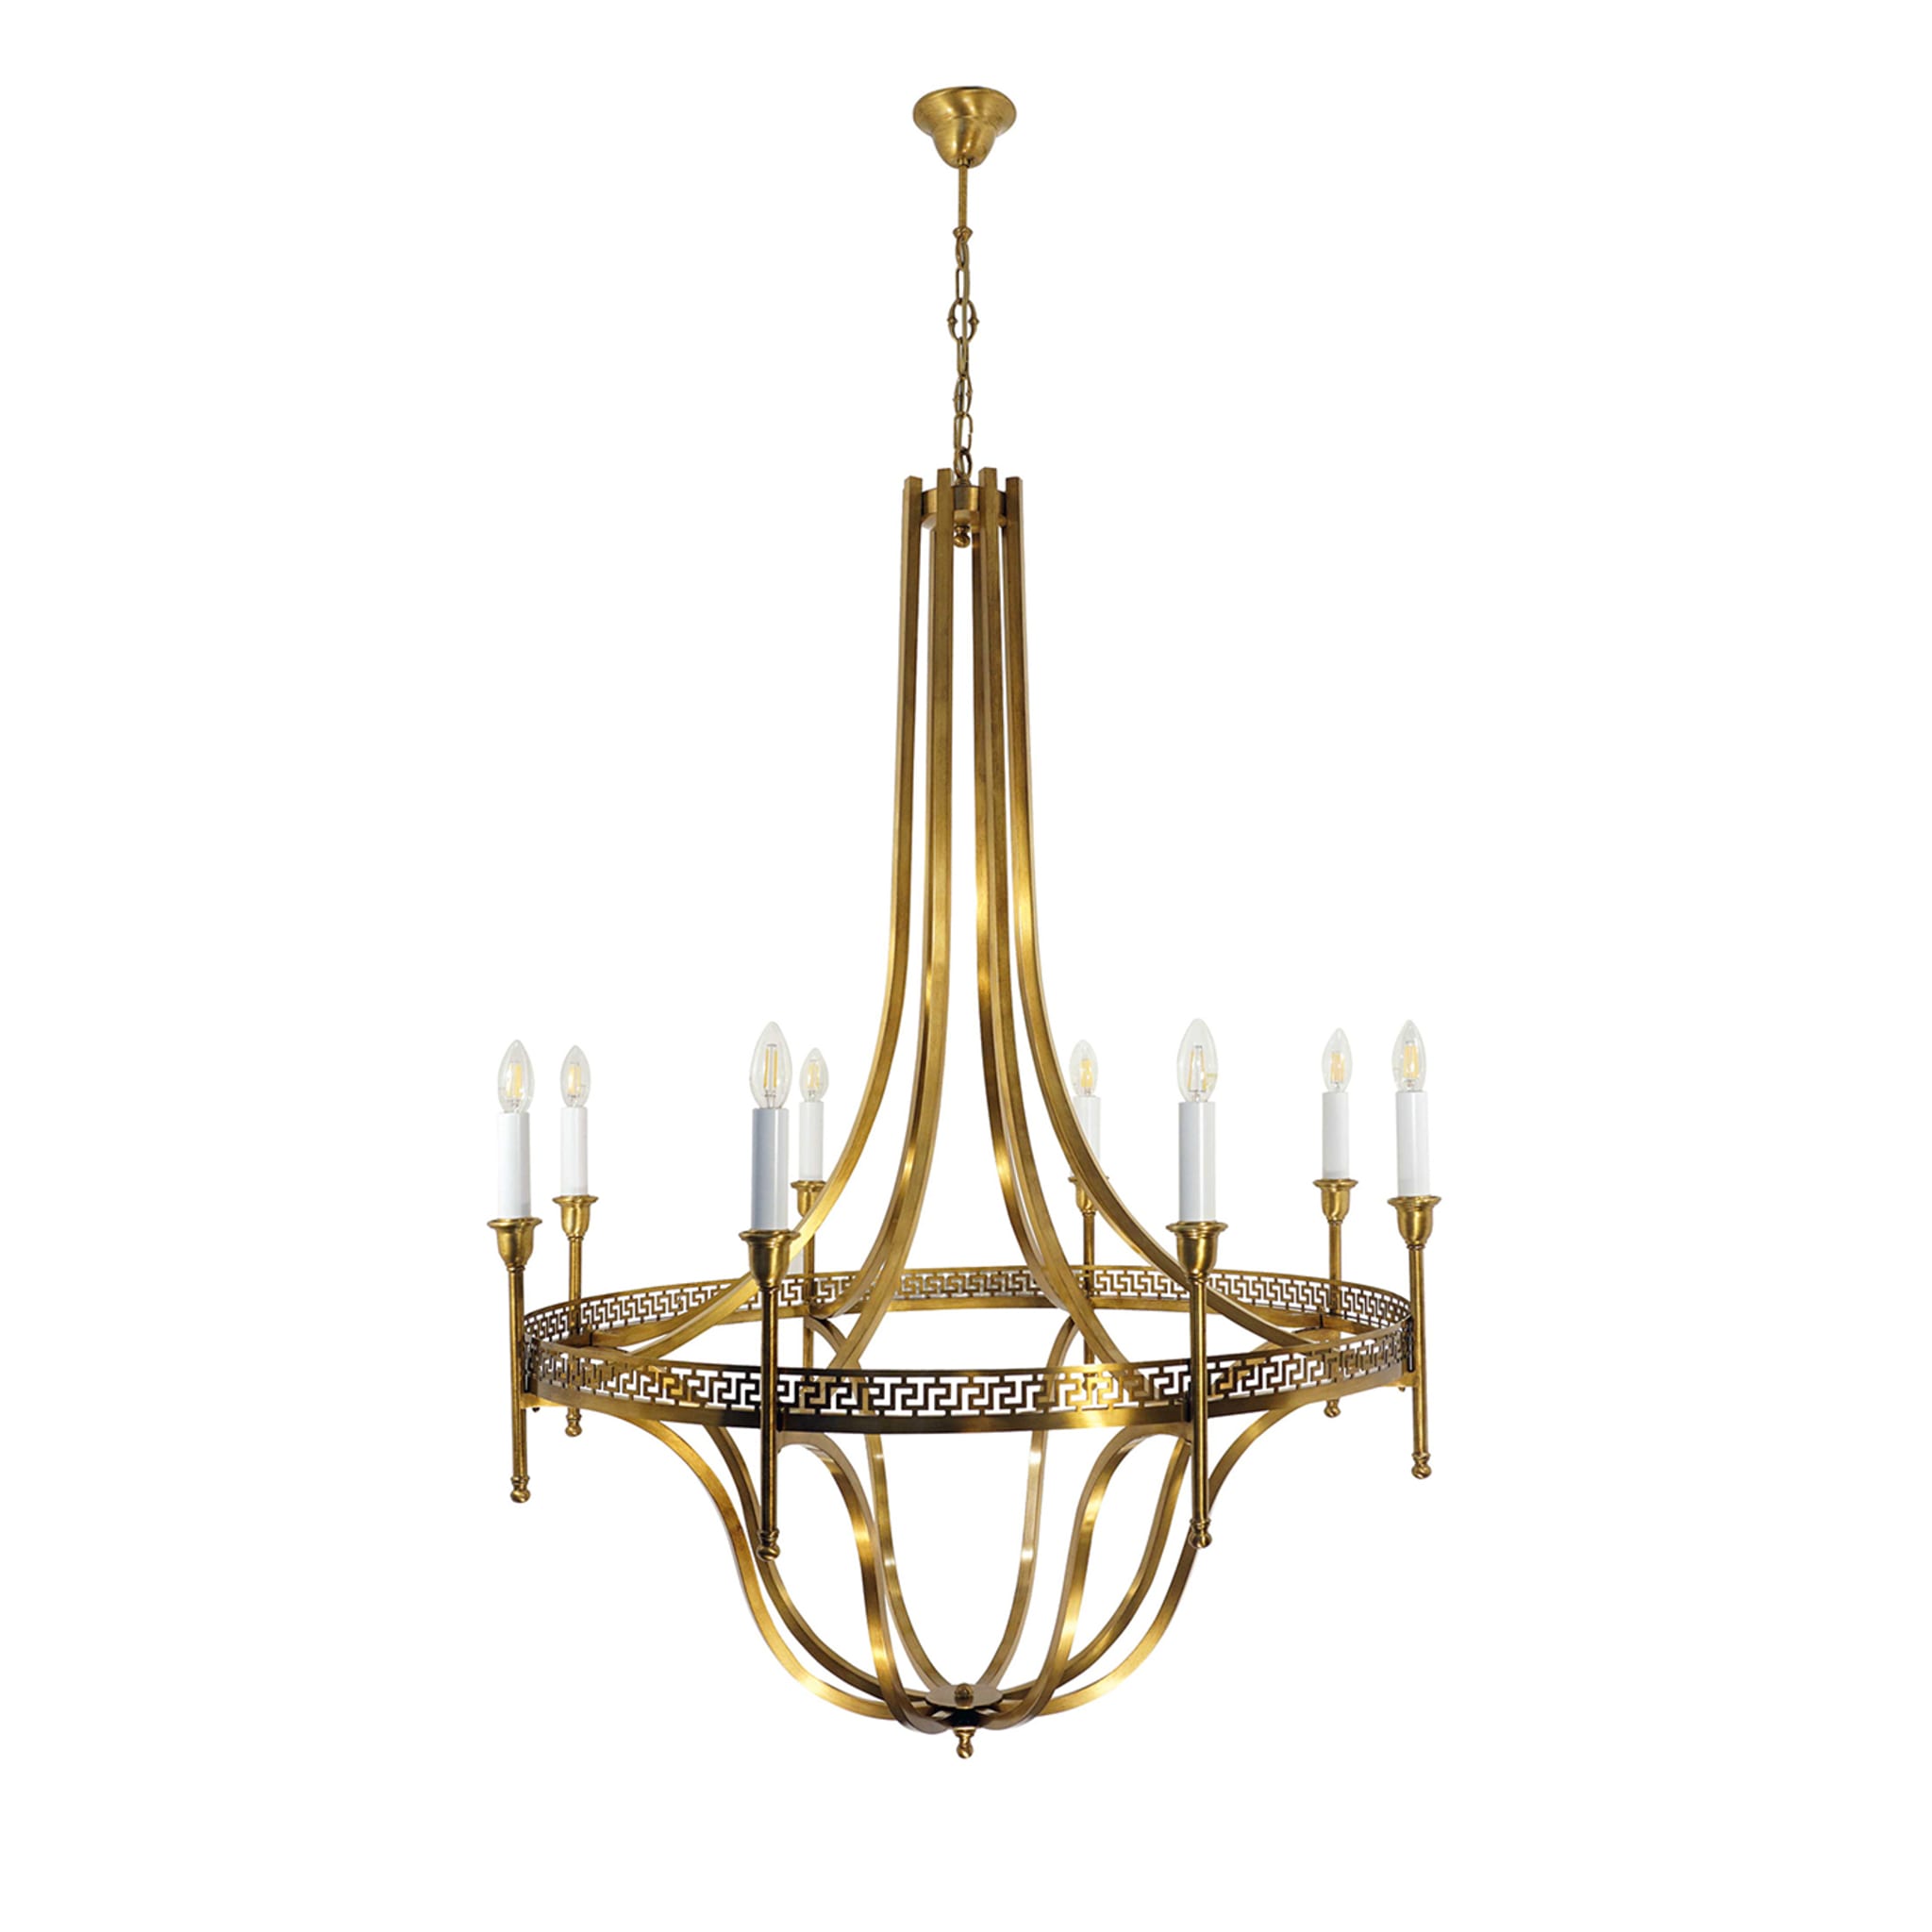 Sirius M390 8-Light Chandelier by Stefano Tabarin - Main view